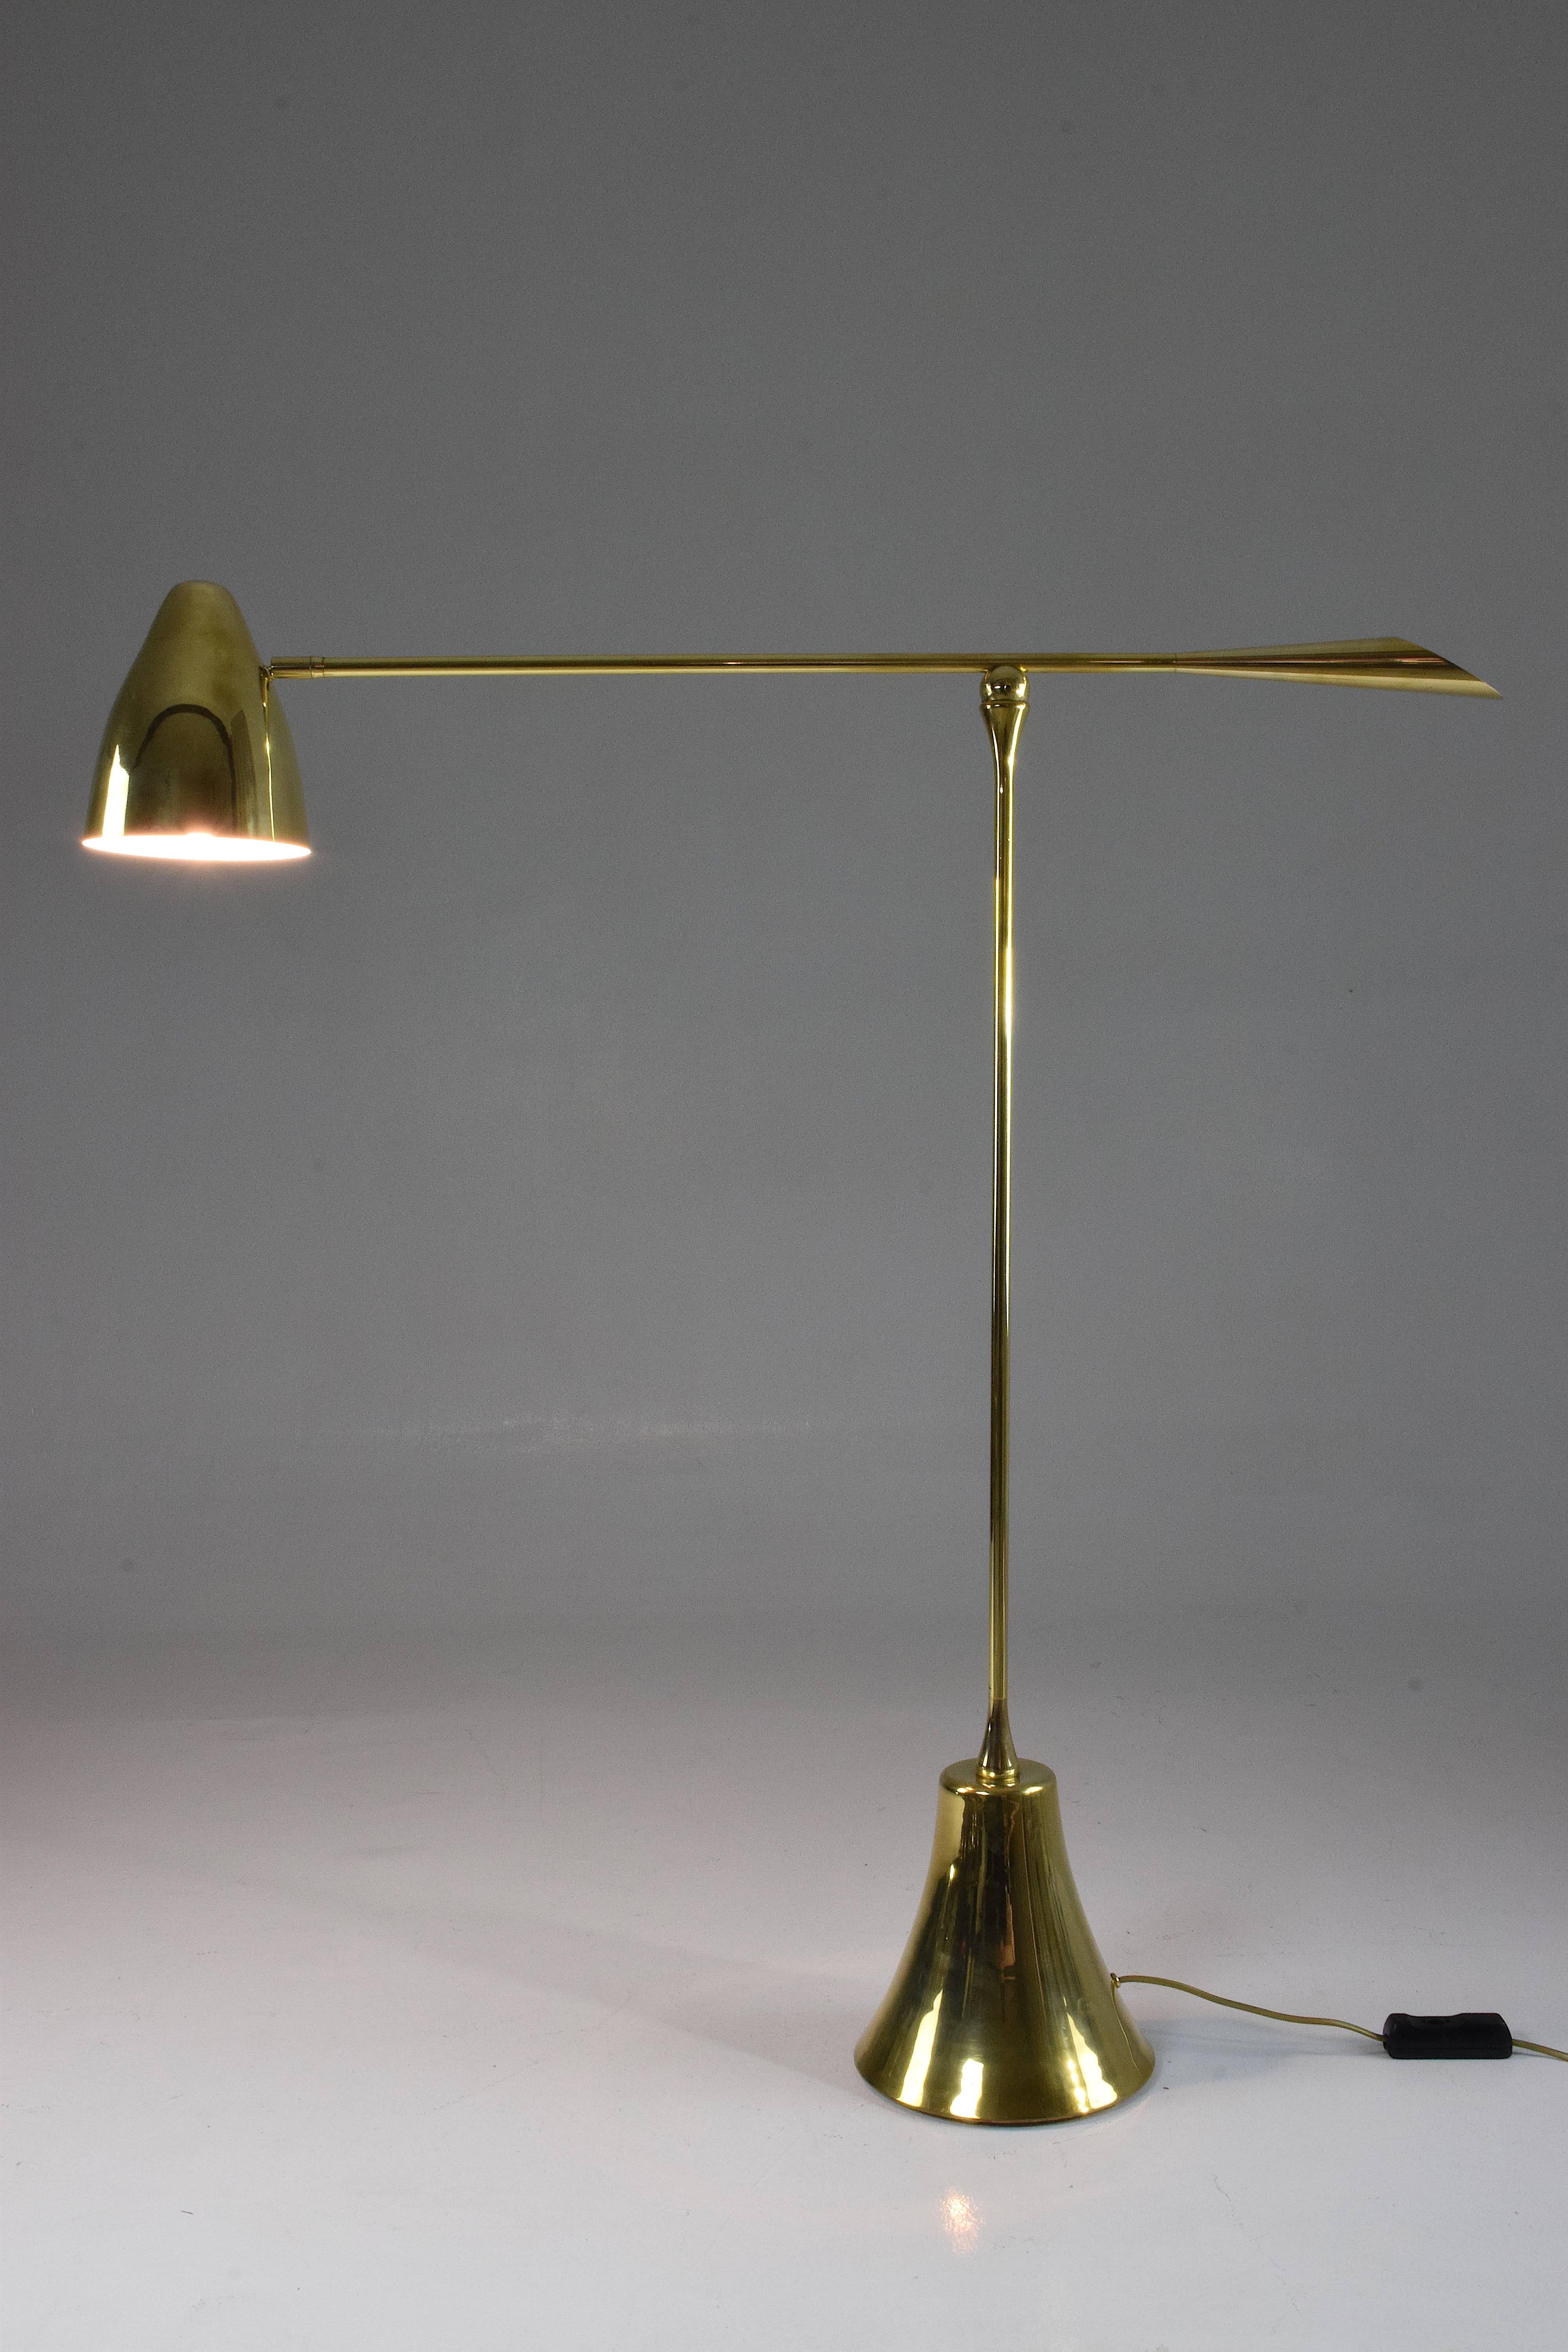 Equilibrium
Definition: when opposite forces are in total harmony 

Contemporary handcrafted floor lamp composed of a thick solid polished brass structure which articulates at the base and mid-arm with a hand-engraved pattern on the handle. The